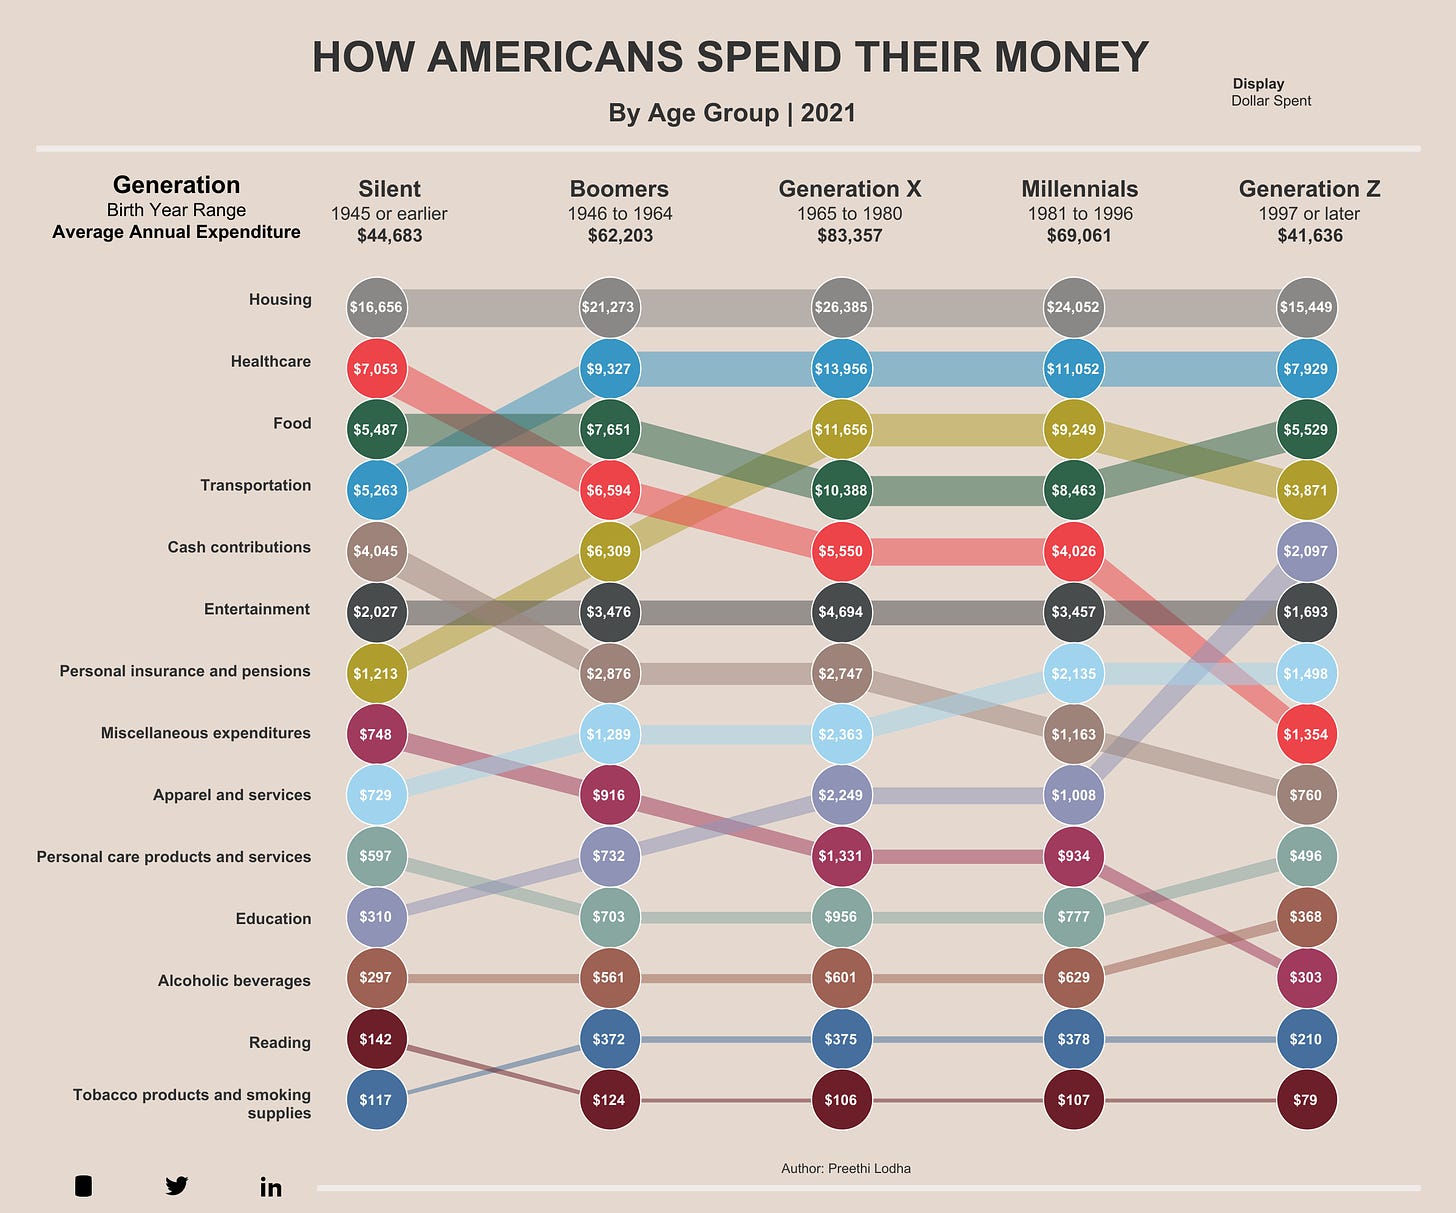 a graphic of how americans spend their money by generation, the link has an interactive version